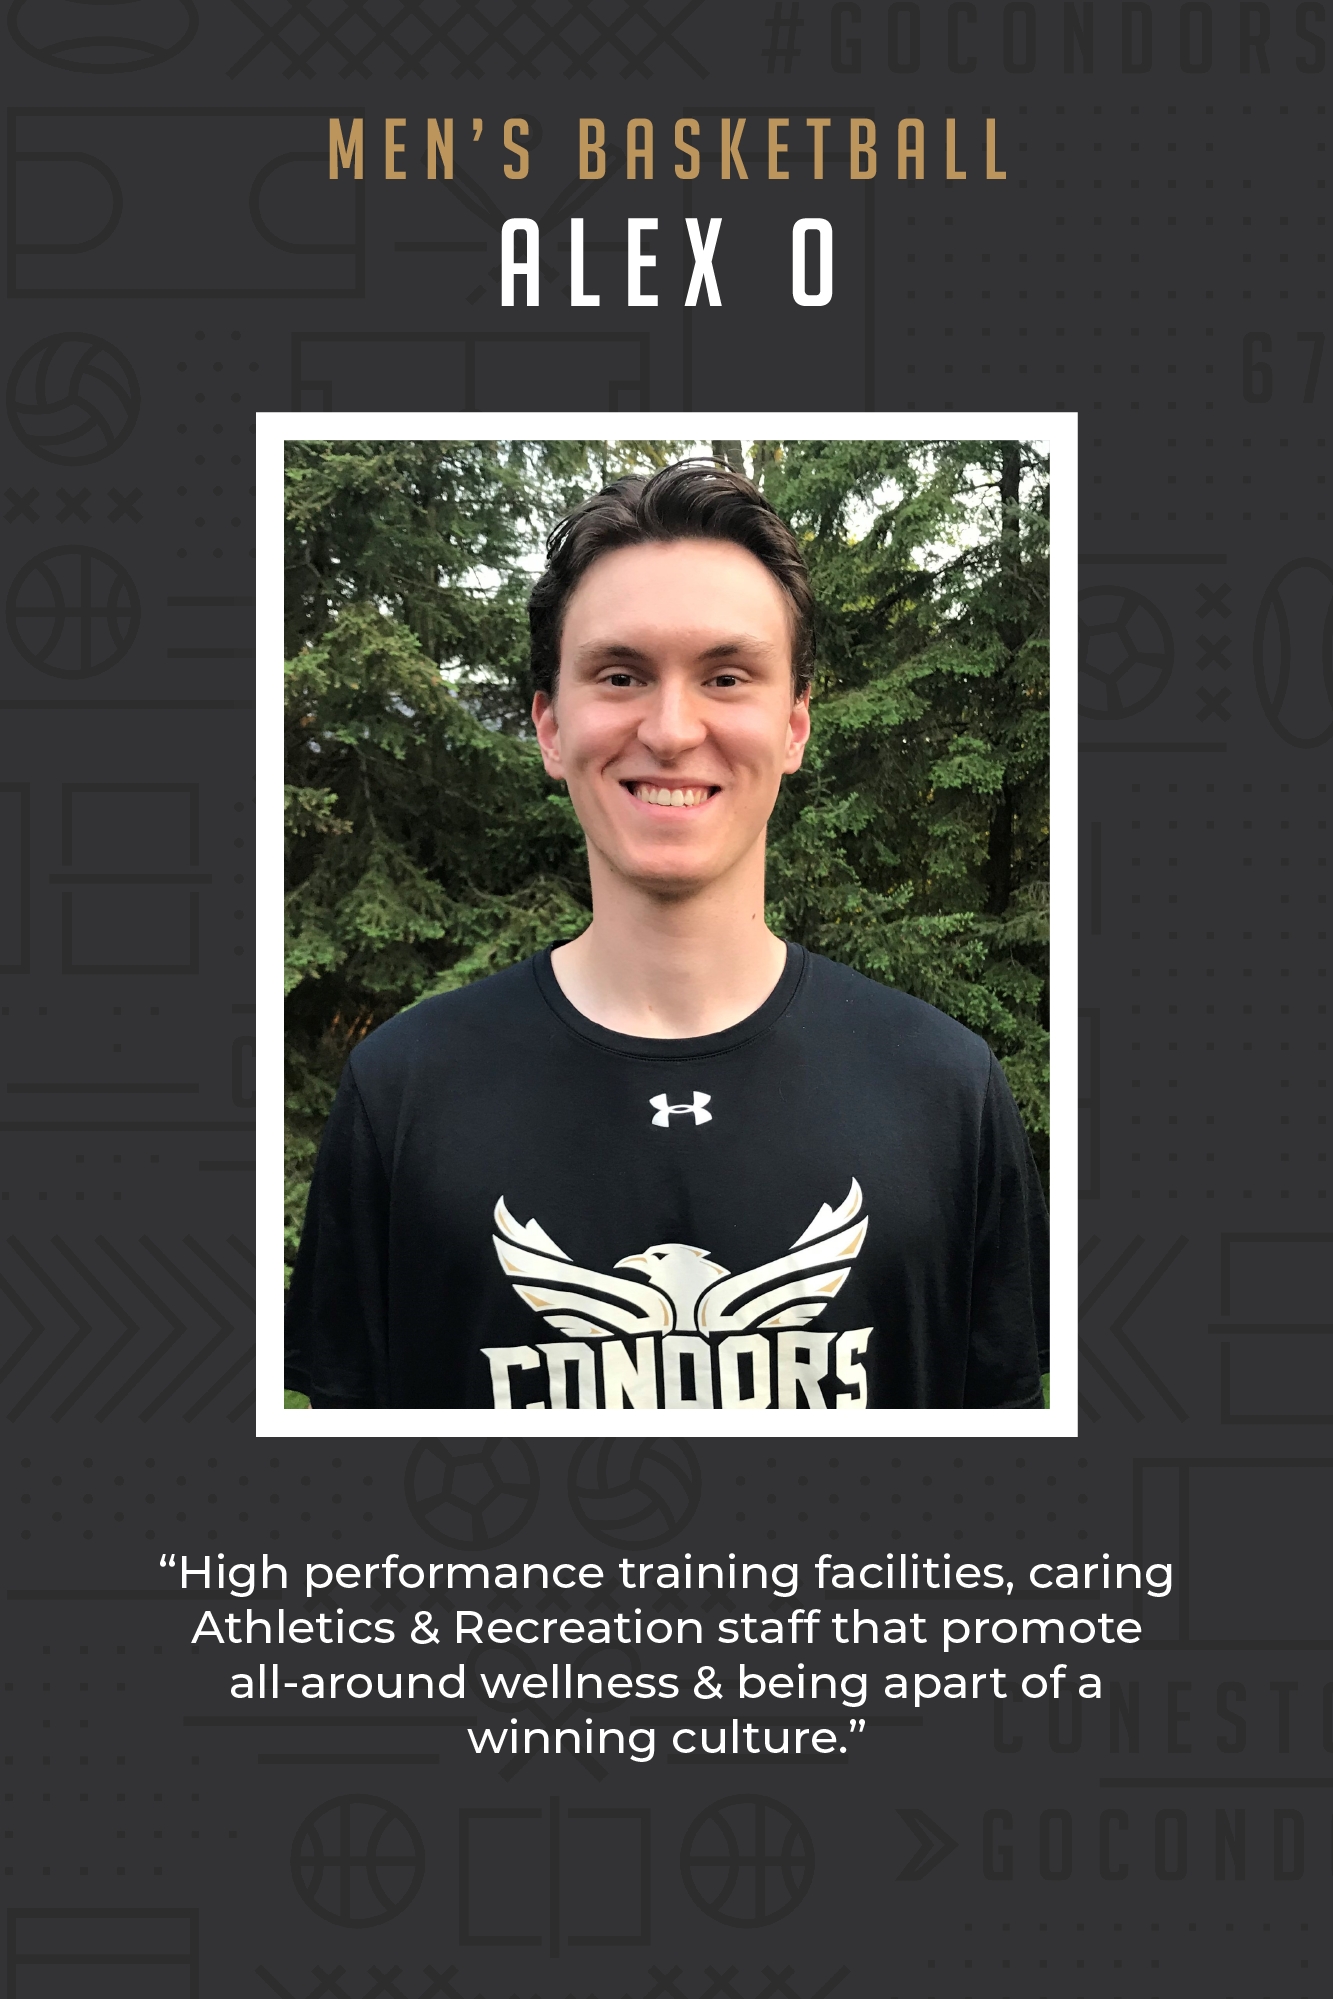 Varsity athlete Alex's testimonial about high performance training facilities, caring athletics & recreation staff that promote wellness and a winning culture